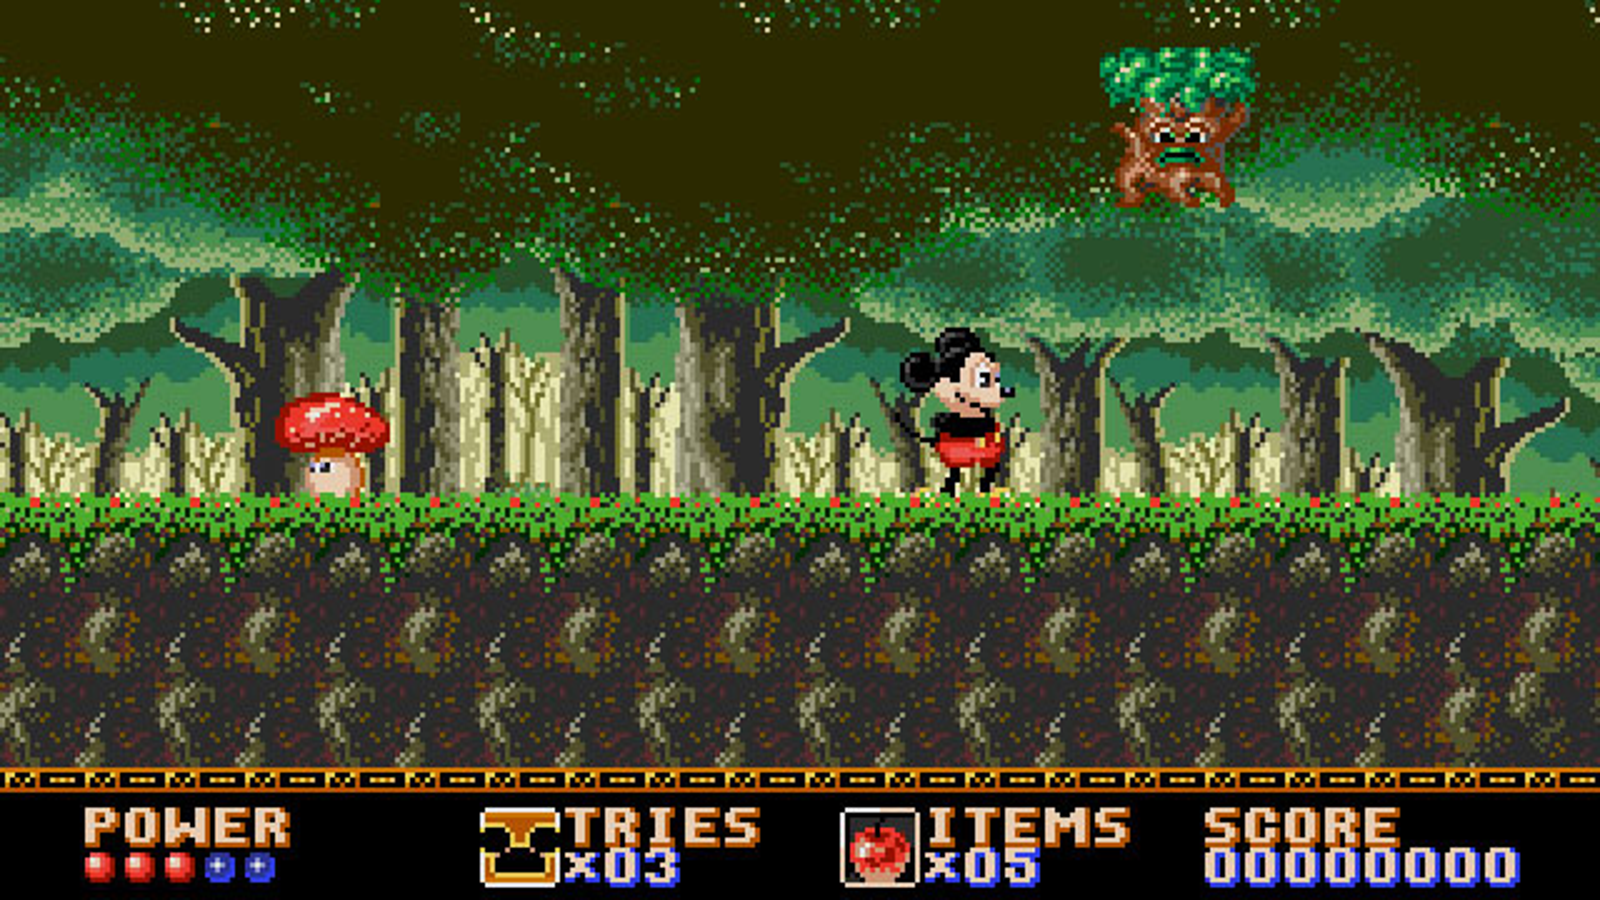 mickey mouse castle of illusion removed